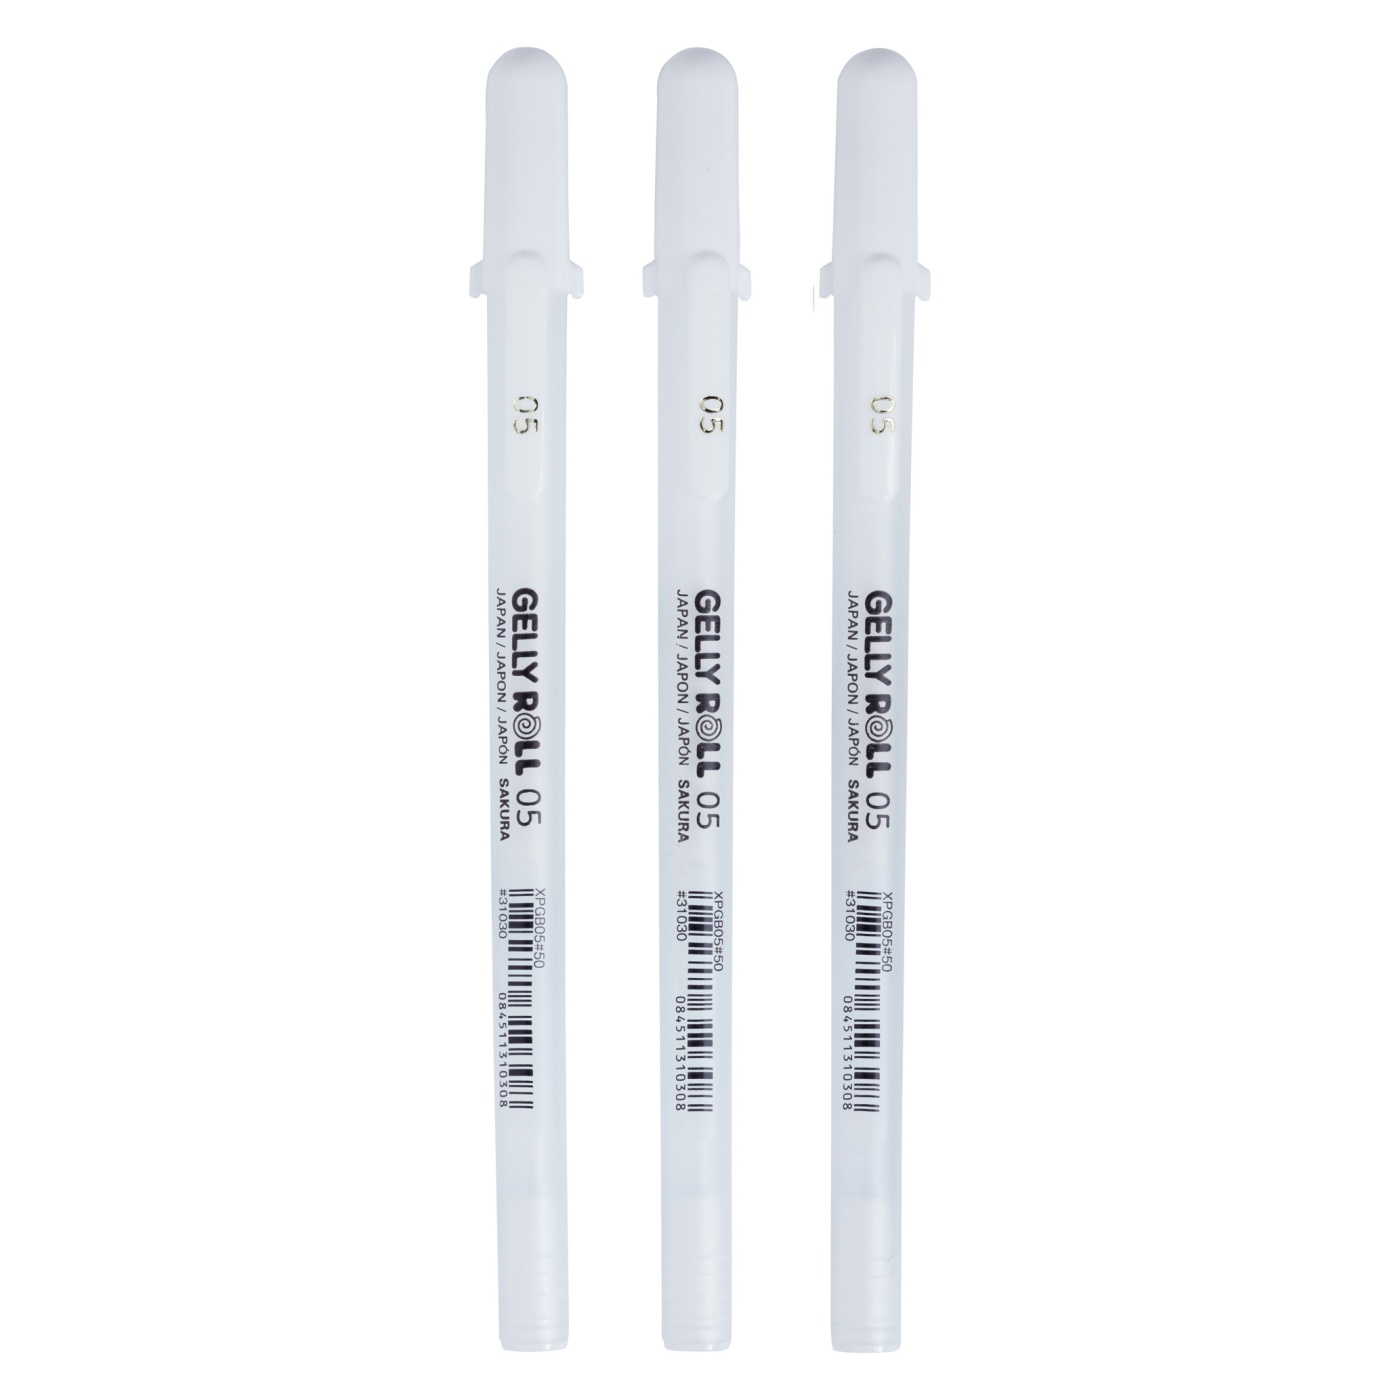 Gelly Roll Basic White 3-pack Fine in the group Pens / Writing / Gel Pens at Pen Store (103535)